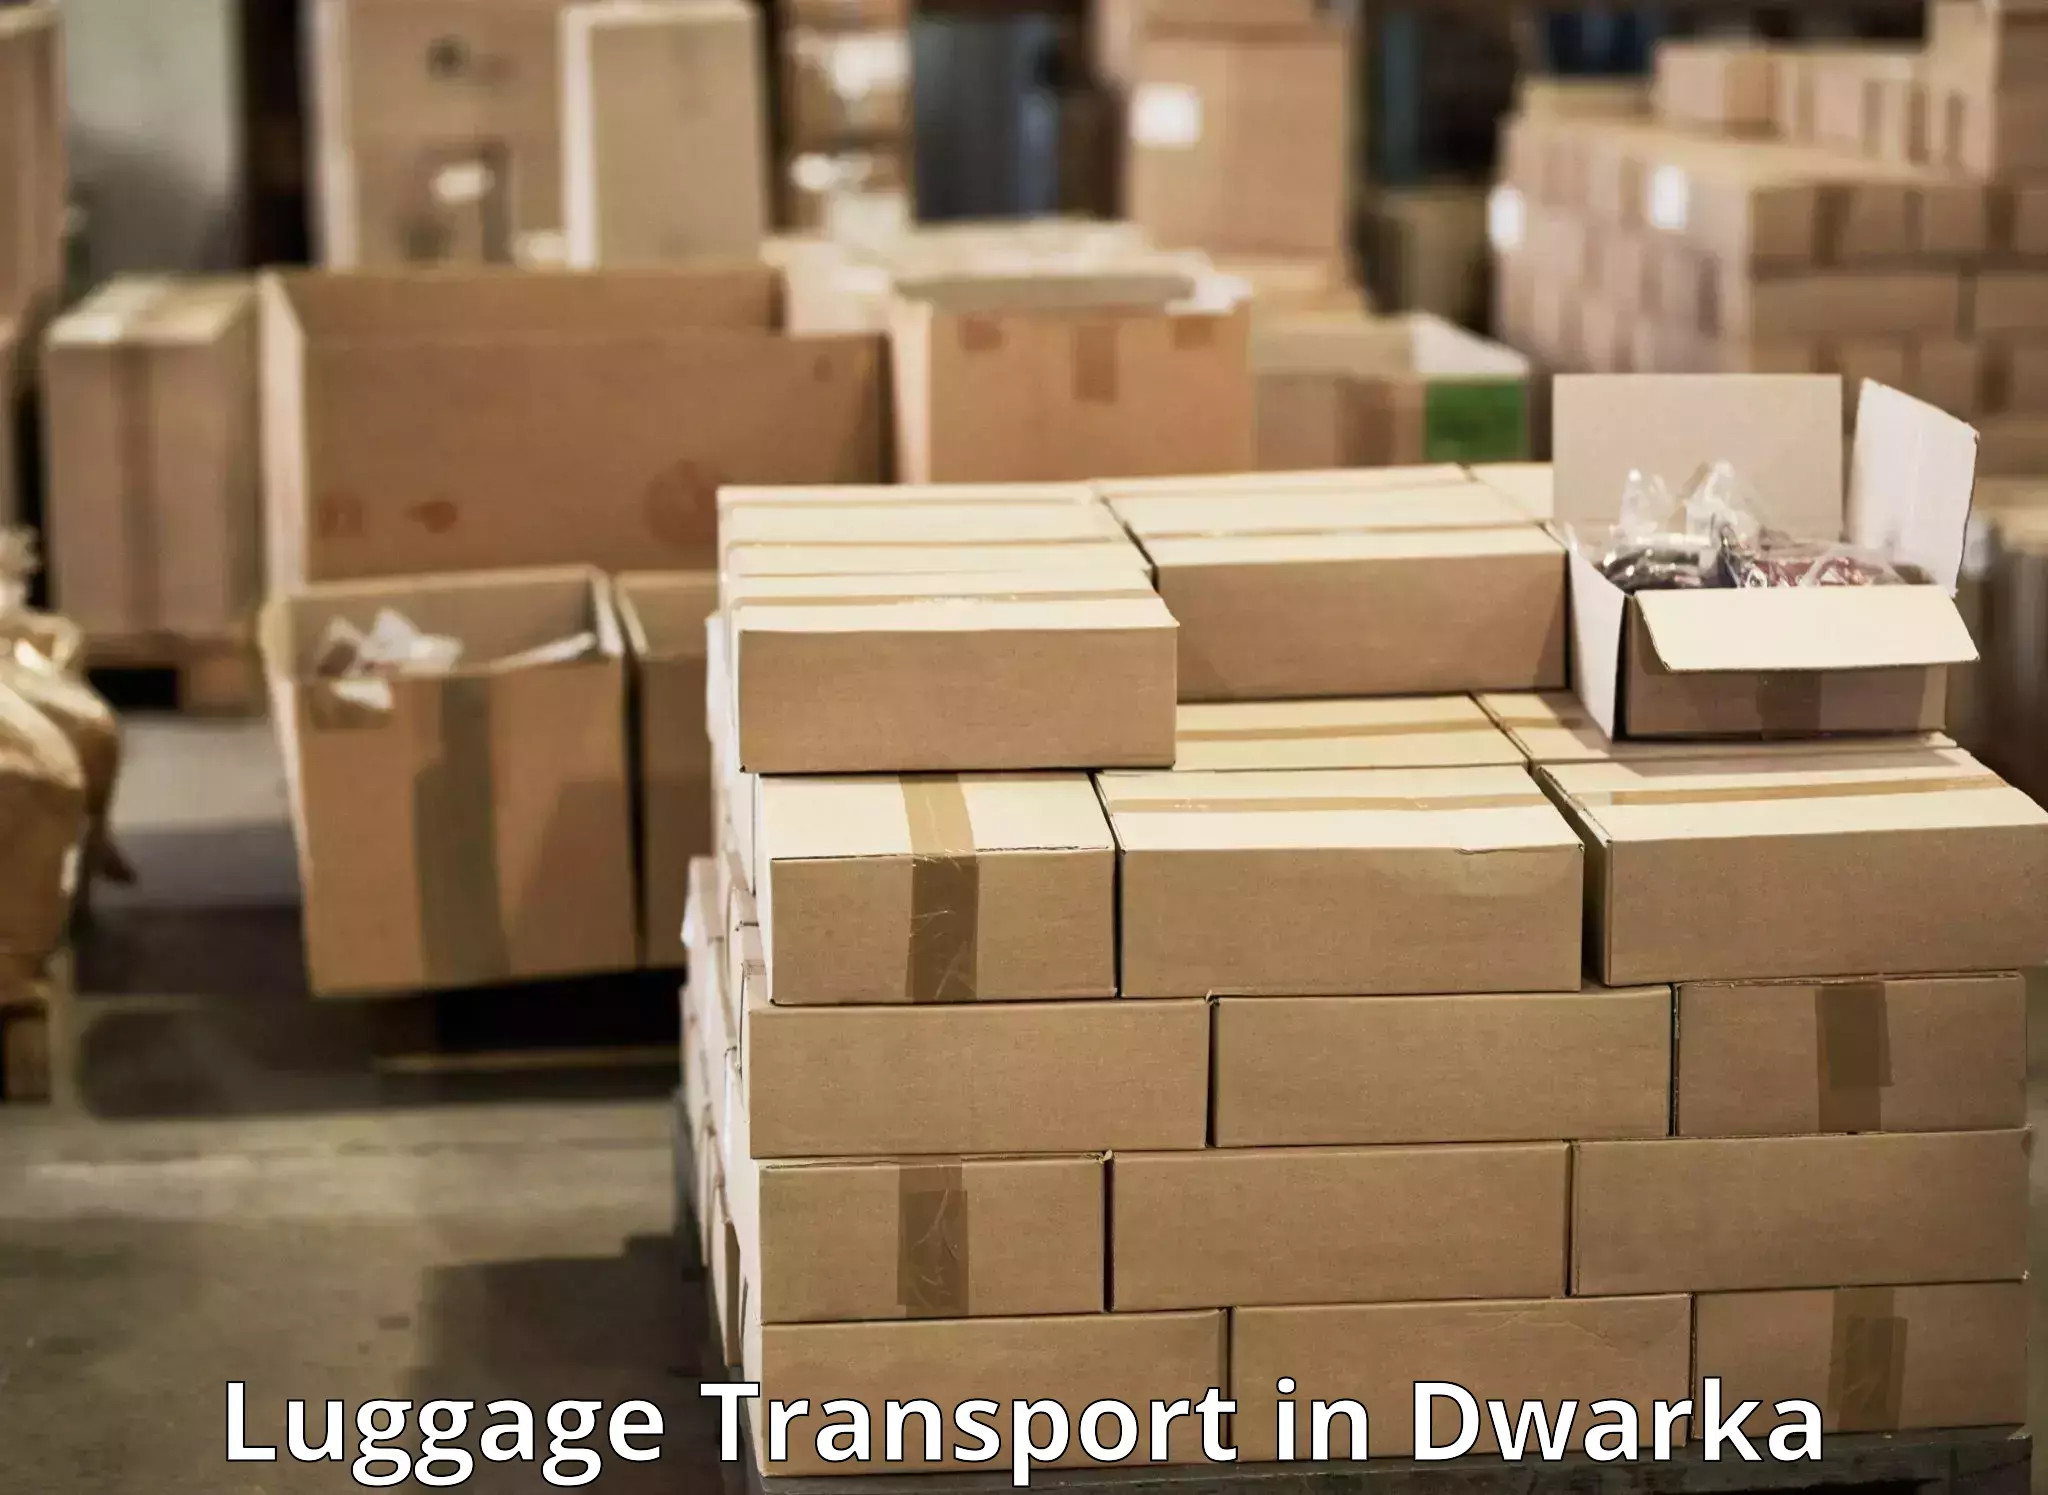 Baggage relocation service in Dwarka